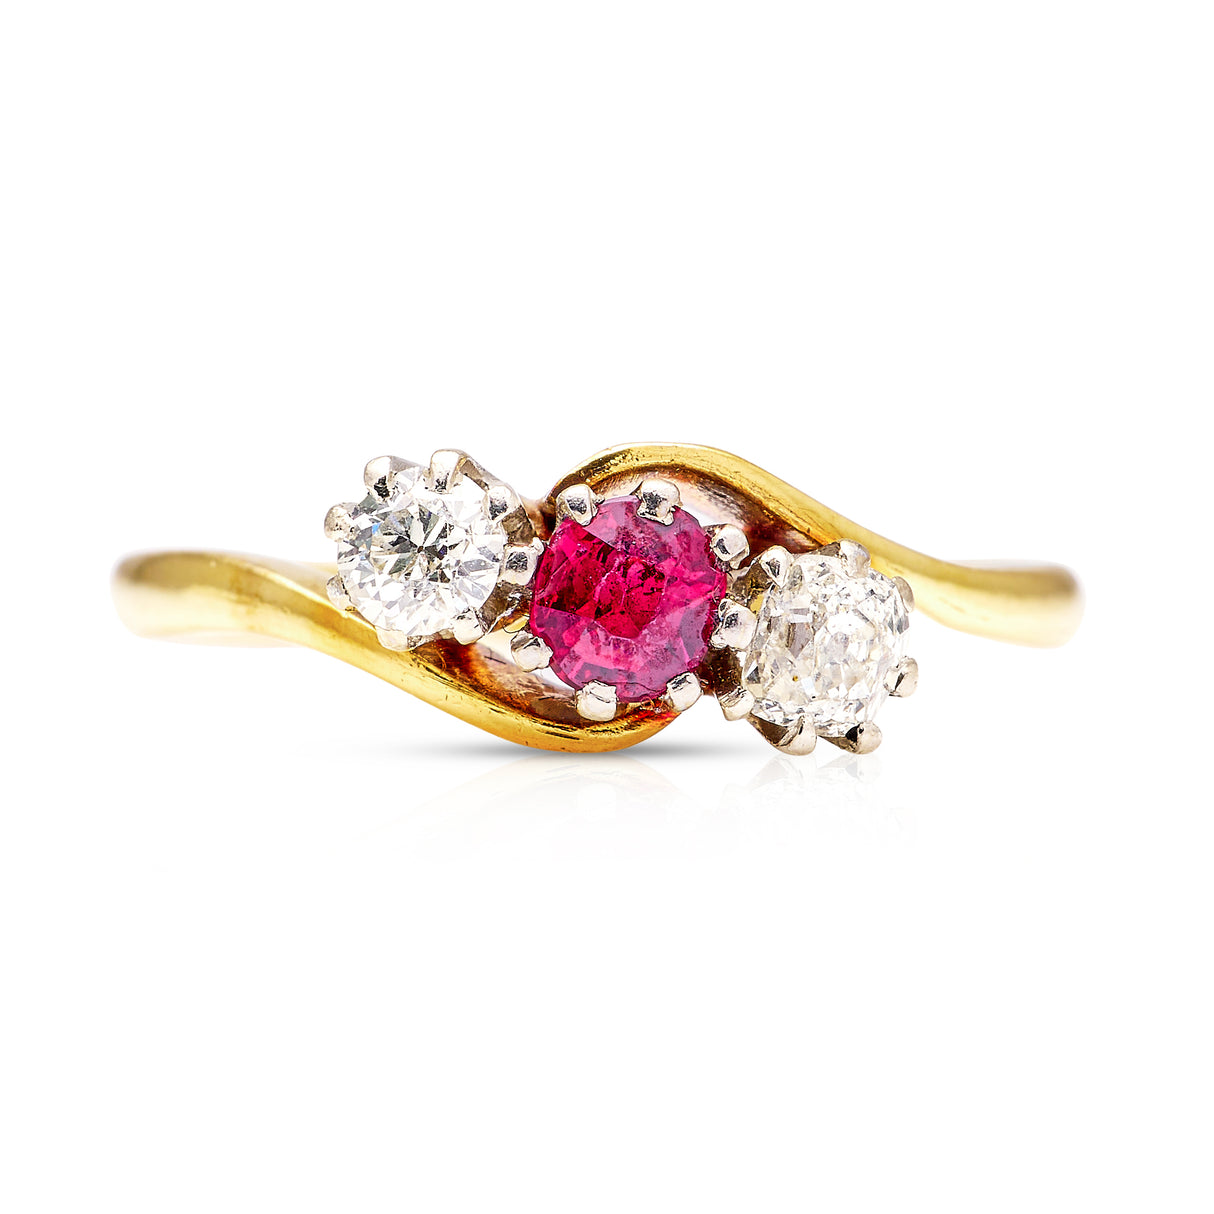 Antique, Edwardian ruby and diamond three-stone ring, 18ct yellow gold and platinum